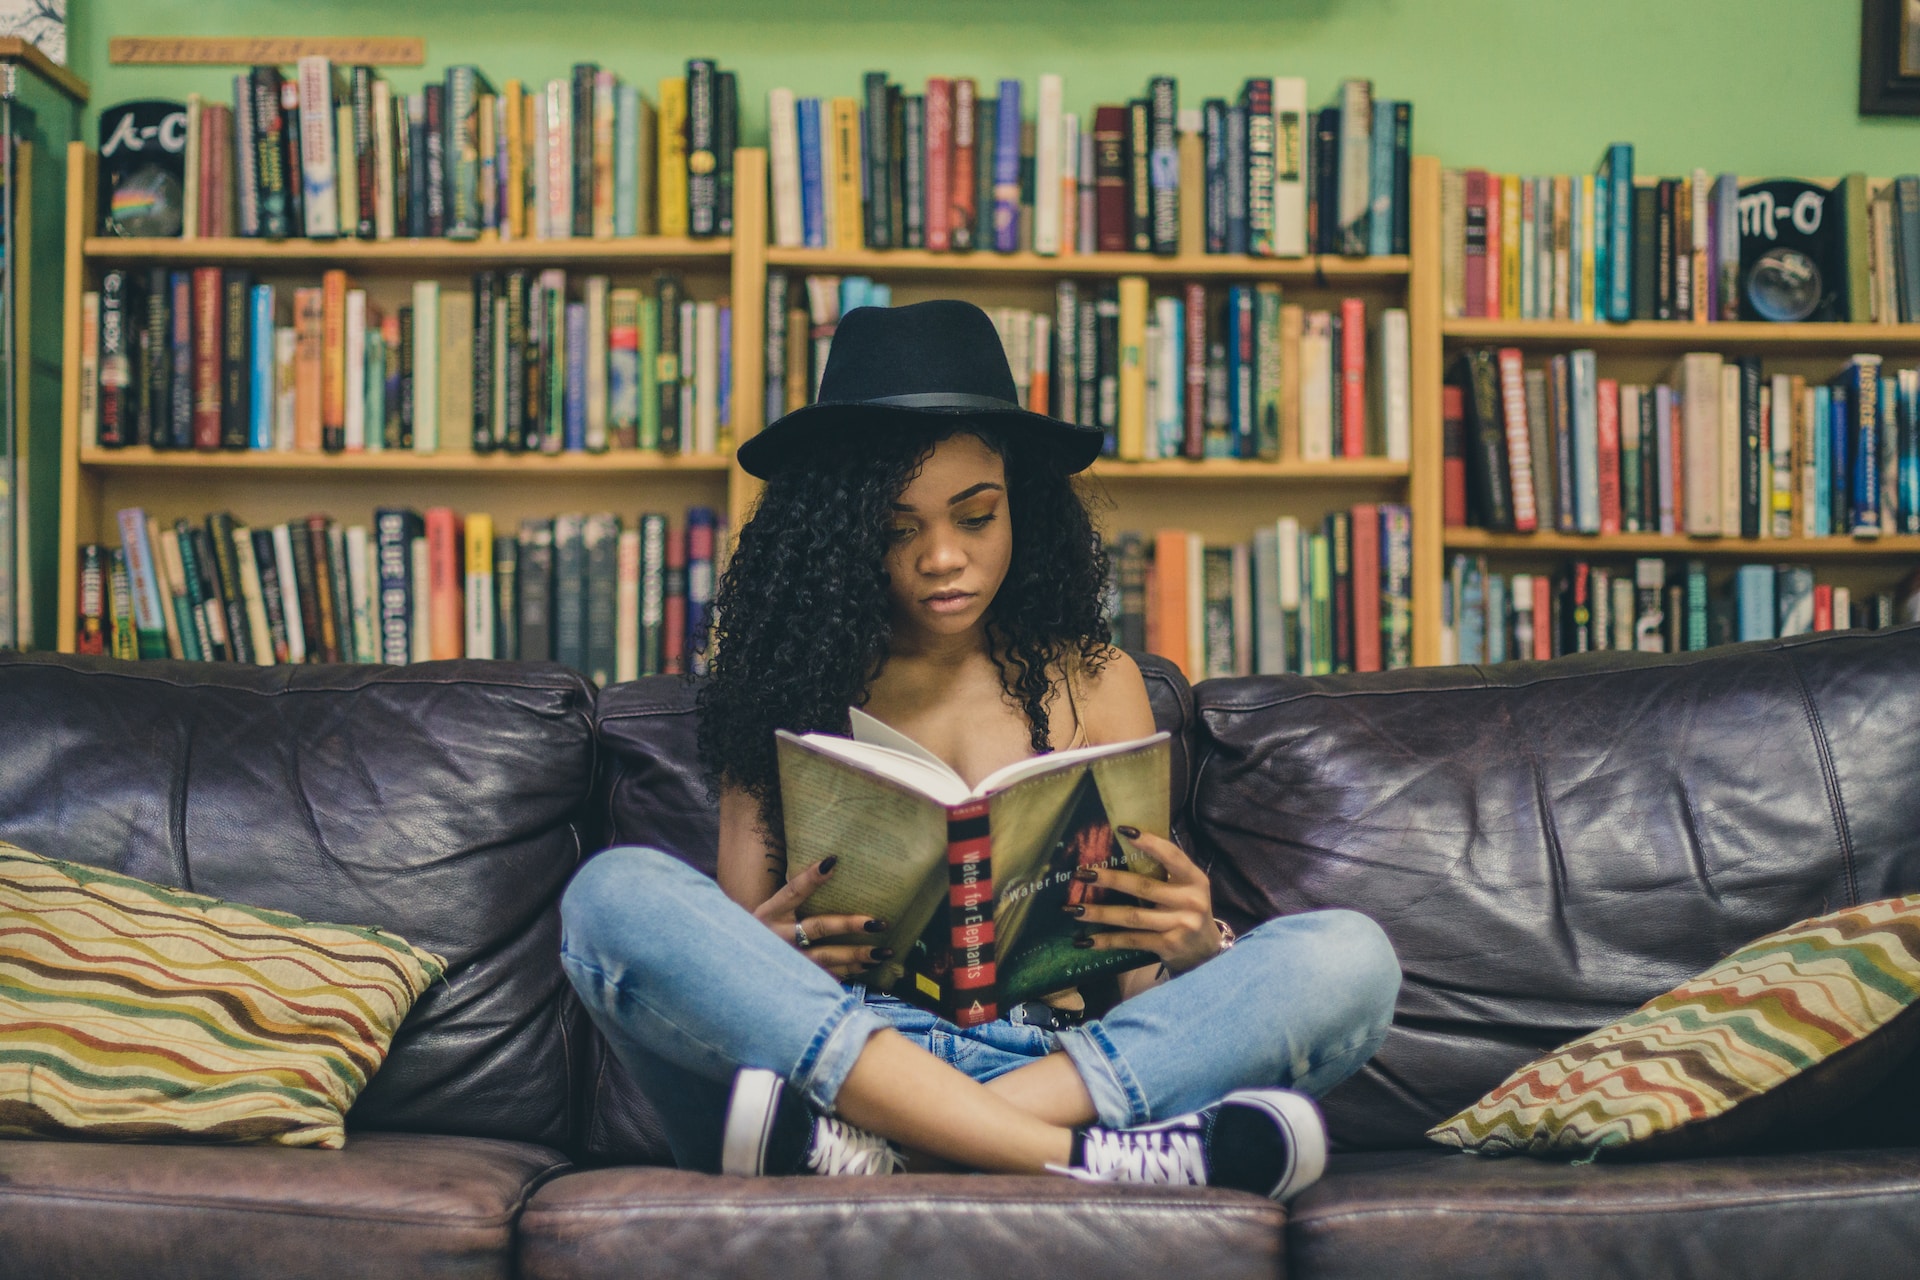 A young mixed race woman sitting on a sofa of a library with her legs crossed reading a book. She has a hat on and there are shelves full of books behind her.